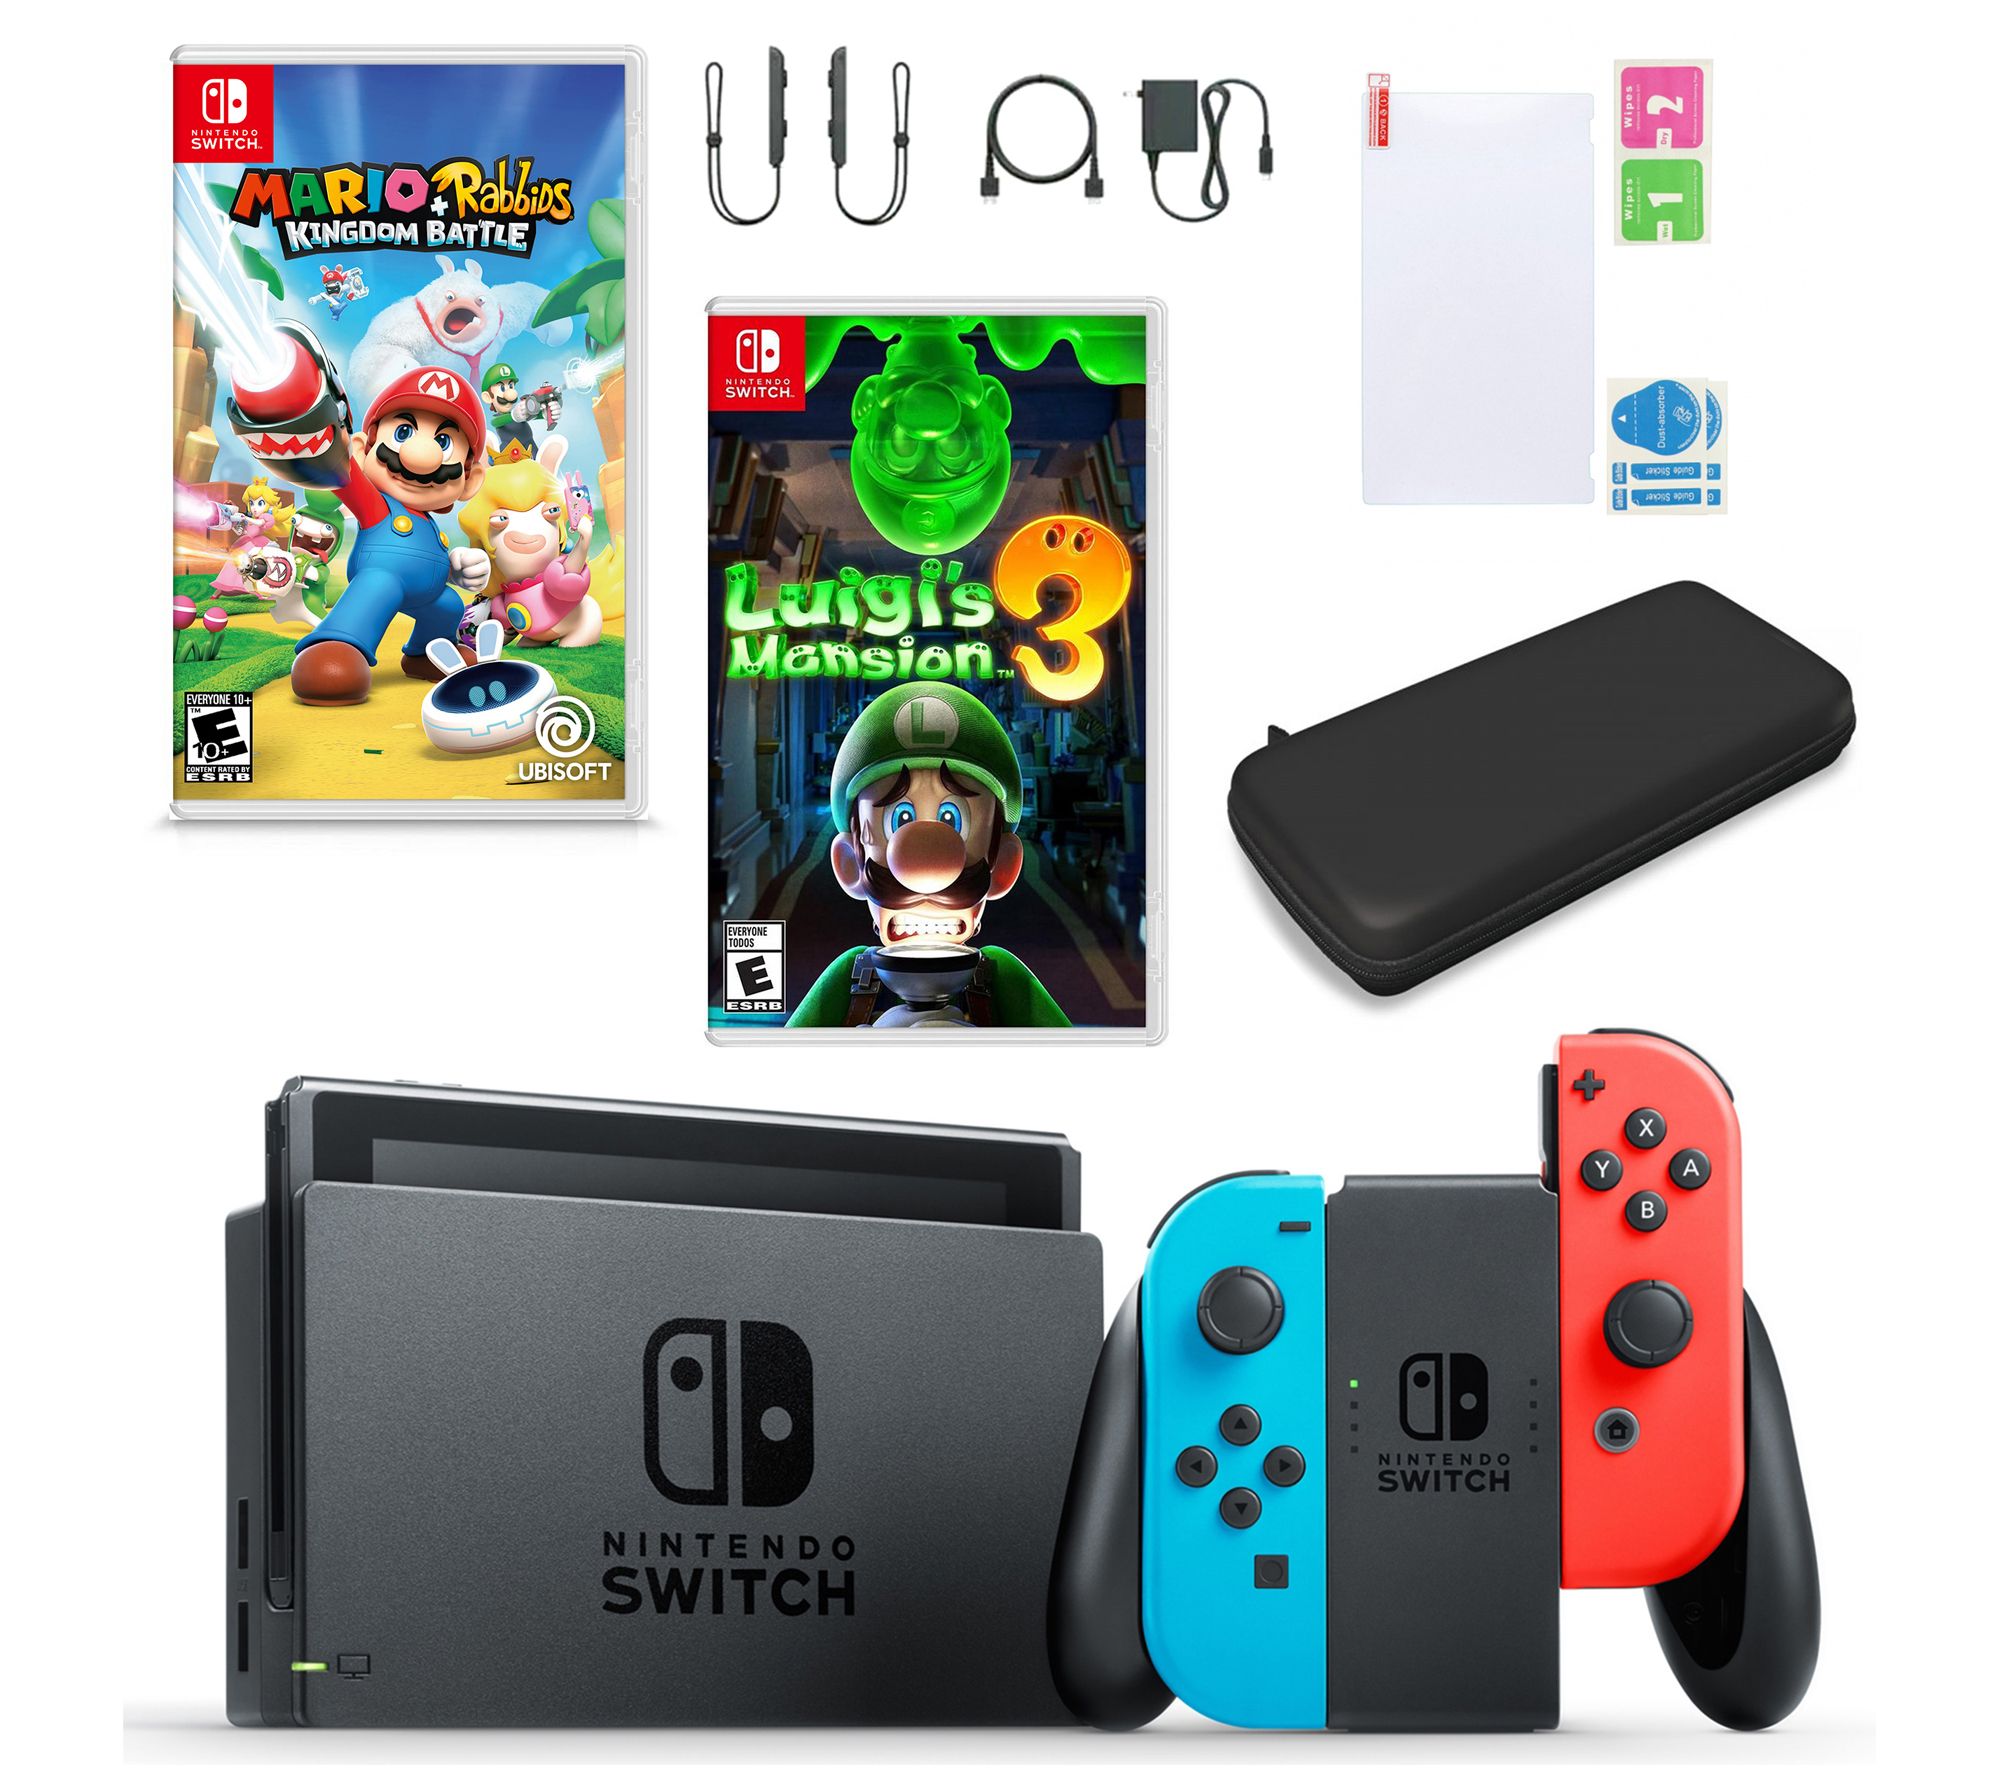 nintendo switch console with luigi's mansion 3